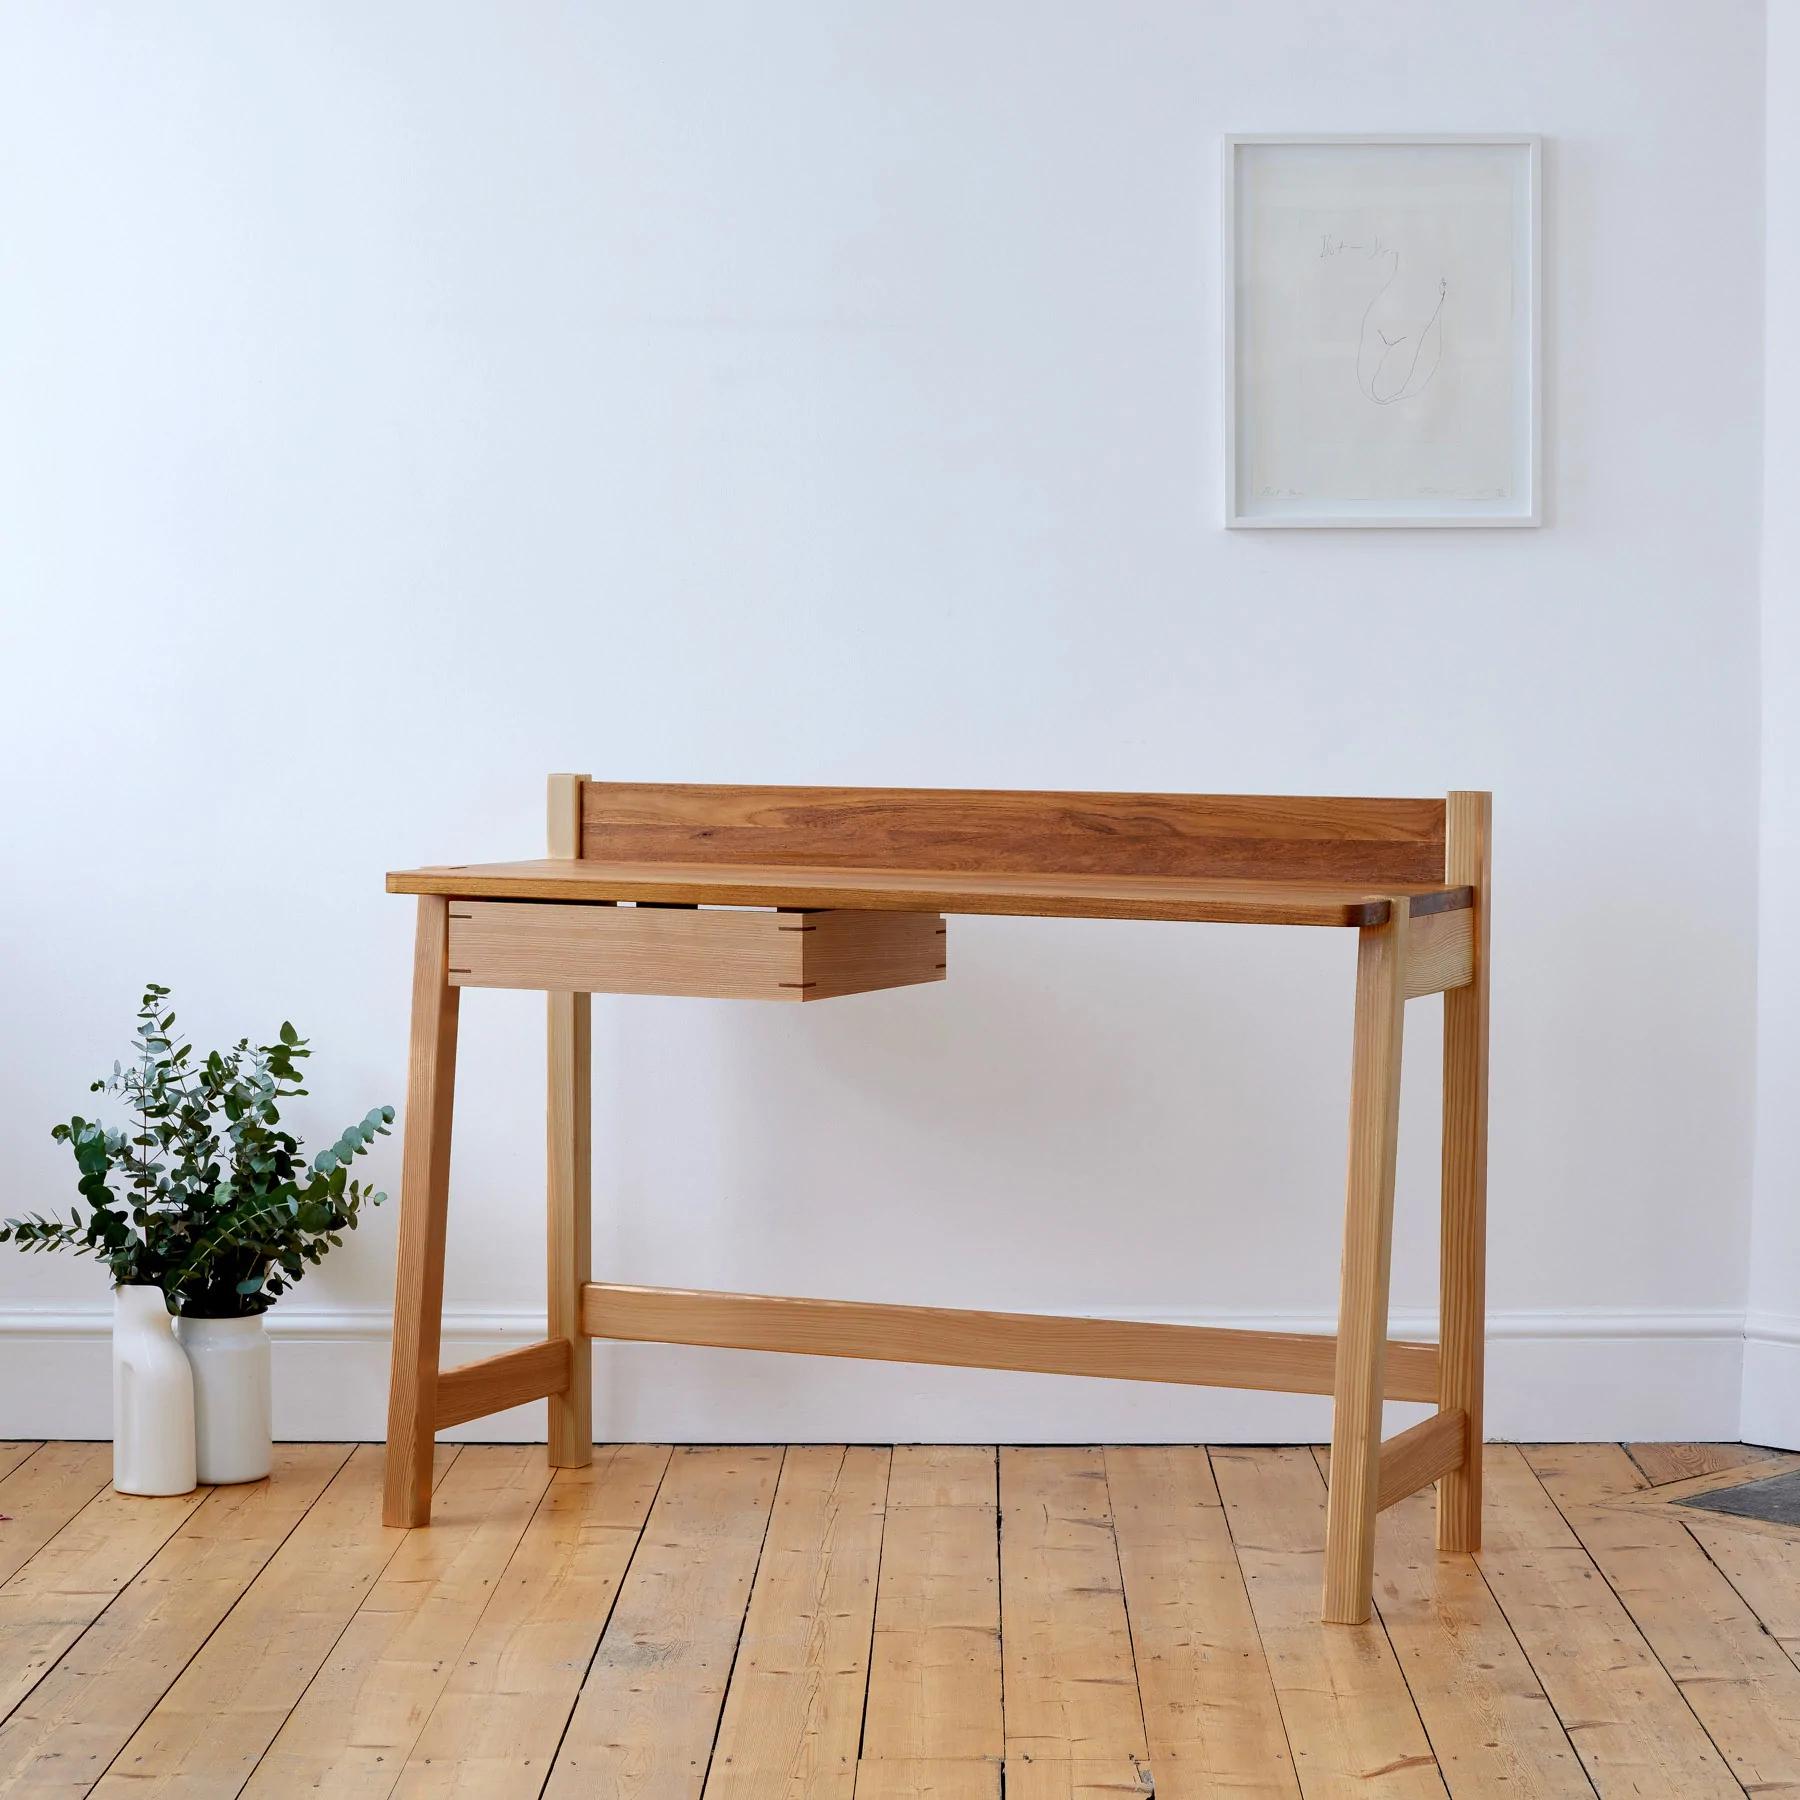 The Ayrton Desk has an abundance of character and effortless style. Boasting elegant lines, the desk features a floating drawer, joined with contrasting elm splines.

A modern statement in any home, its minimal design marries two contrasting yet